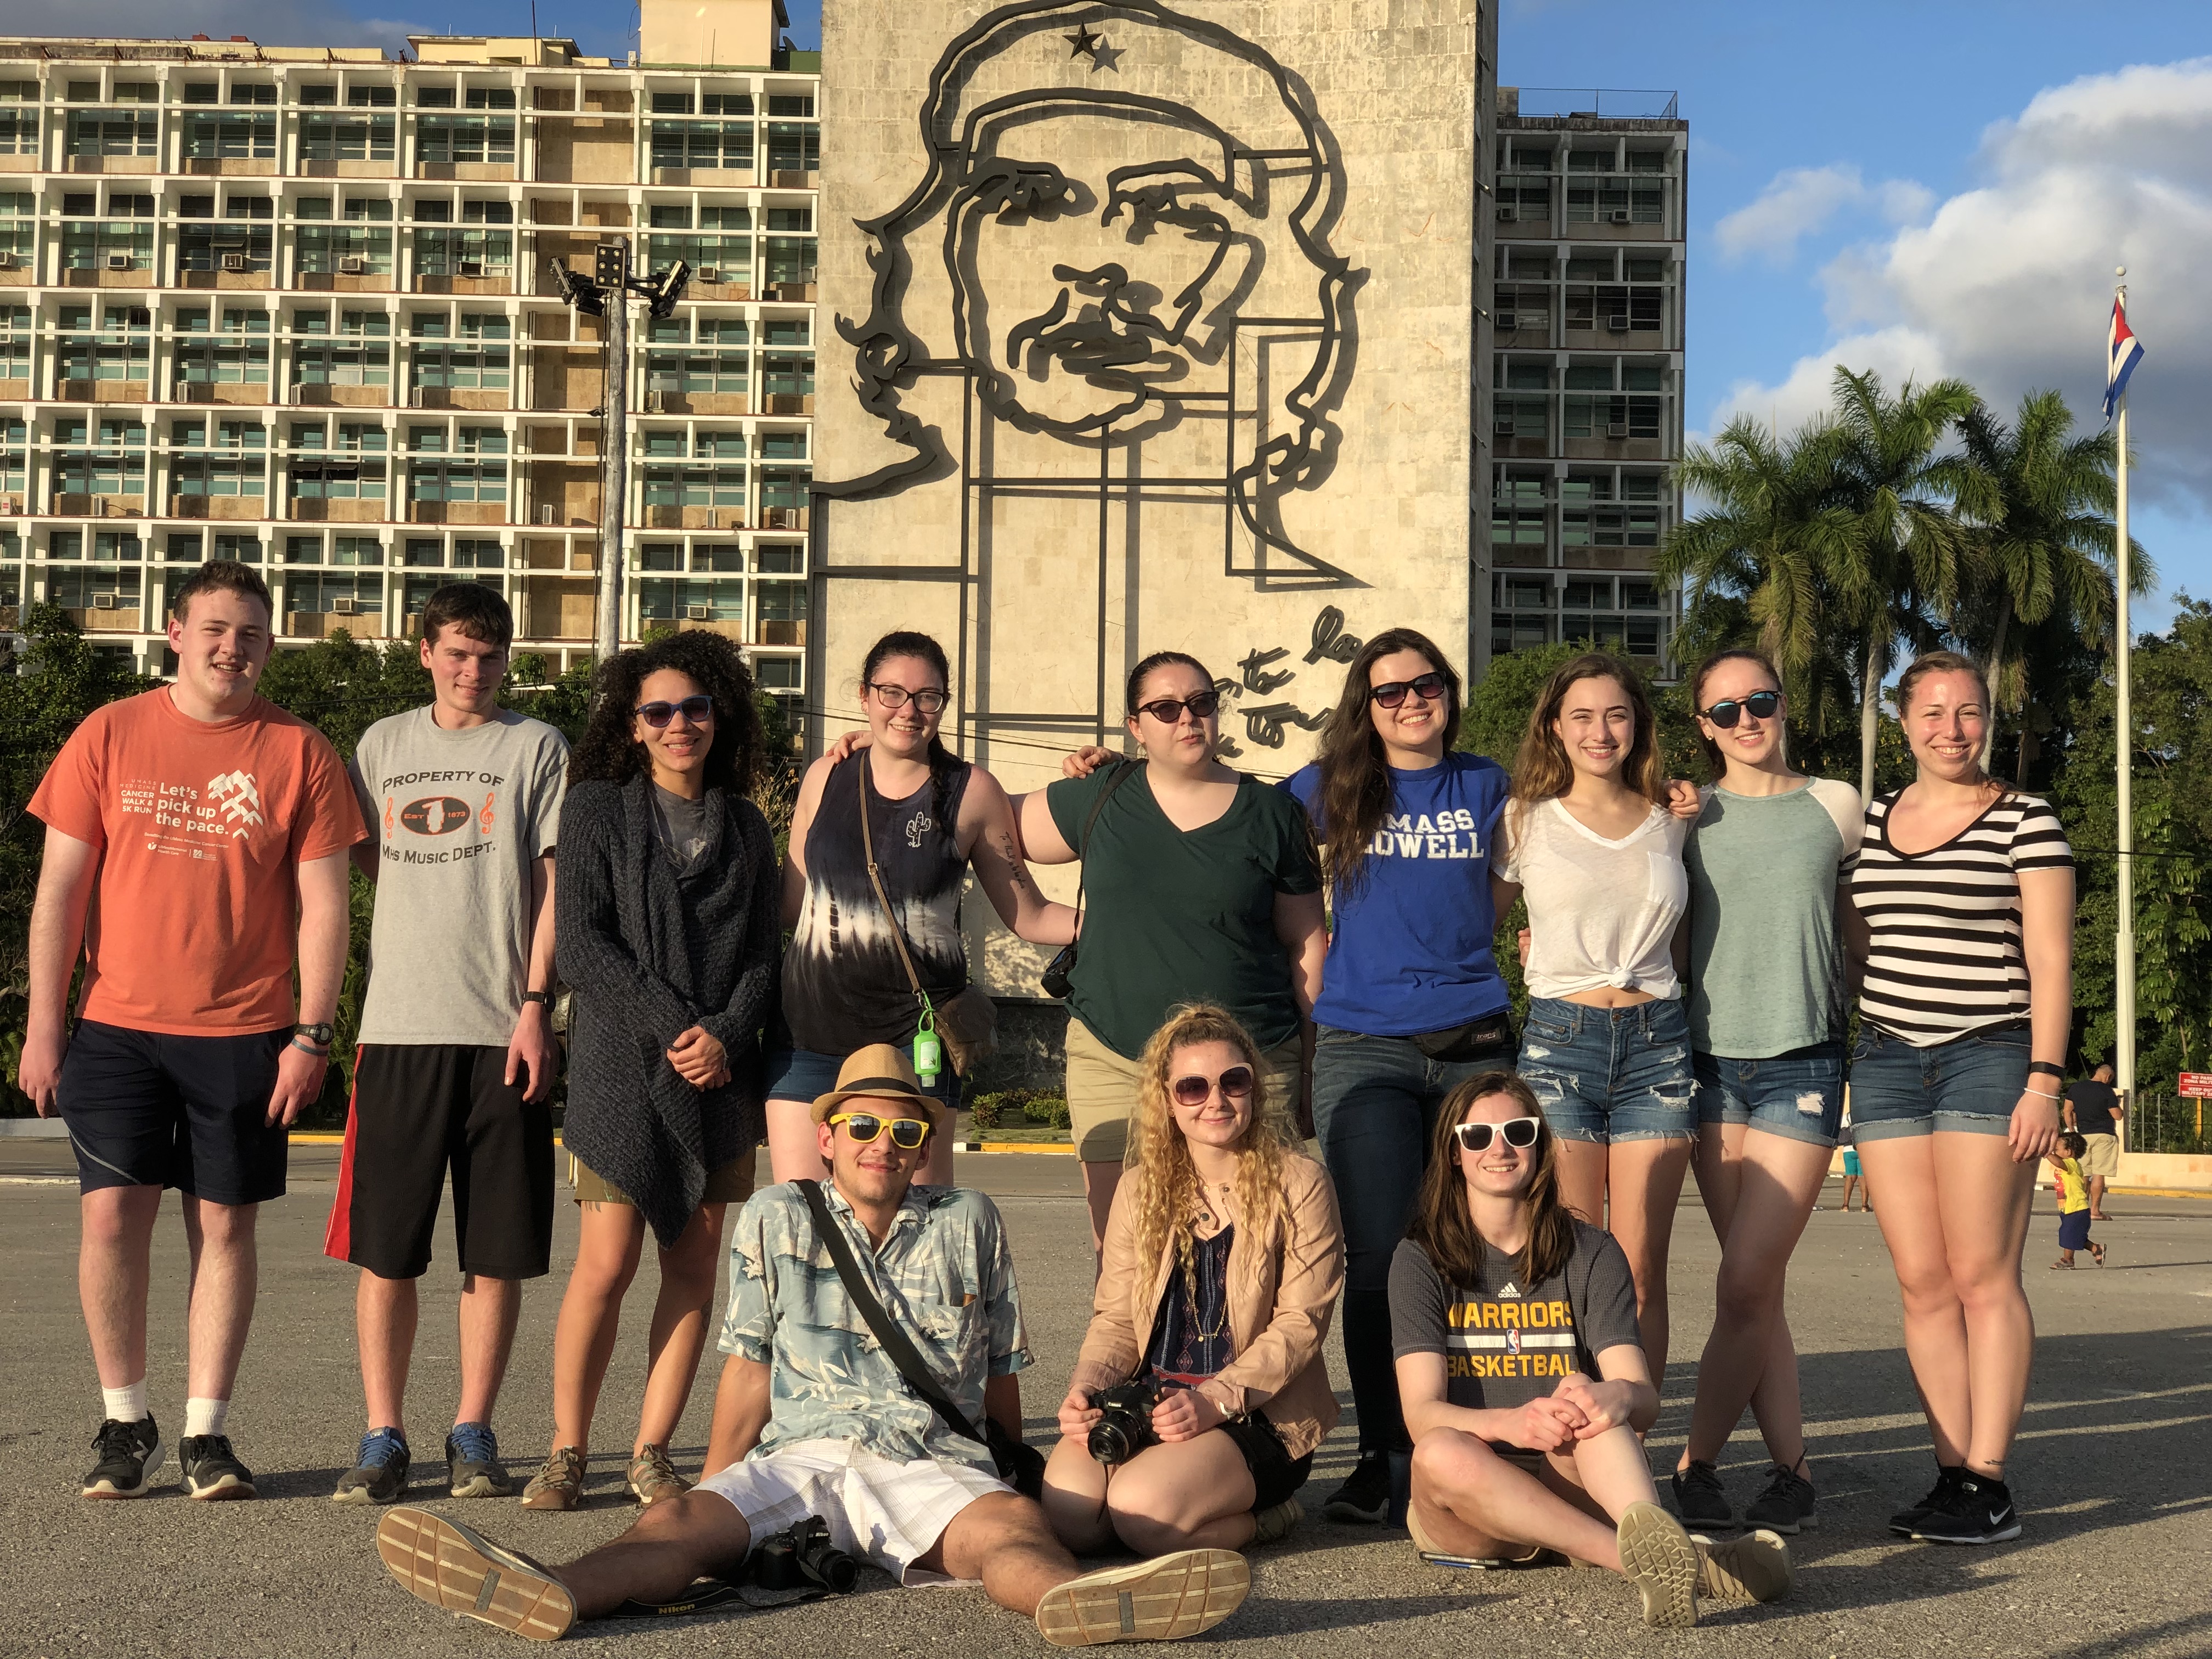 Honors students stand in Revolution Square, in front of a large portrait of Che Guevara.